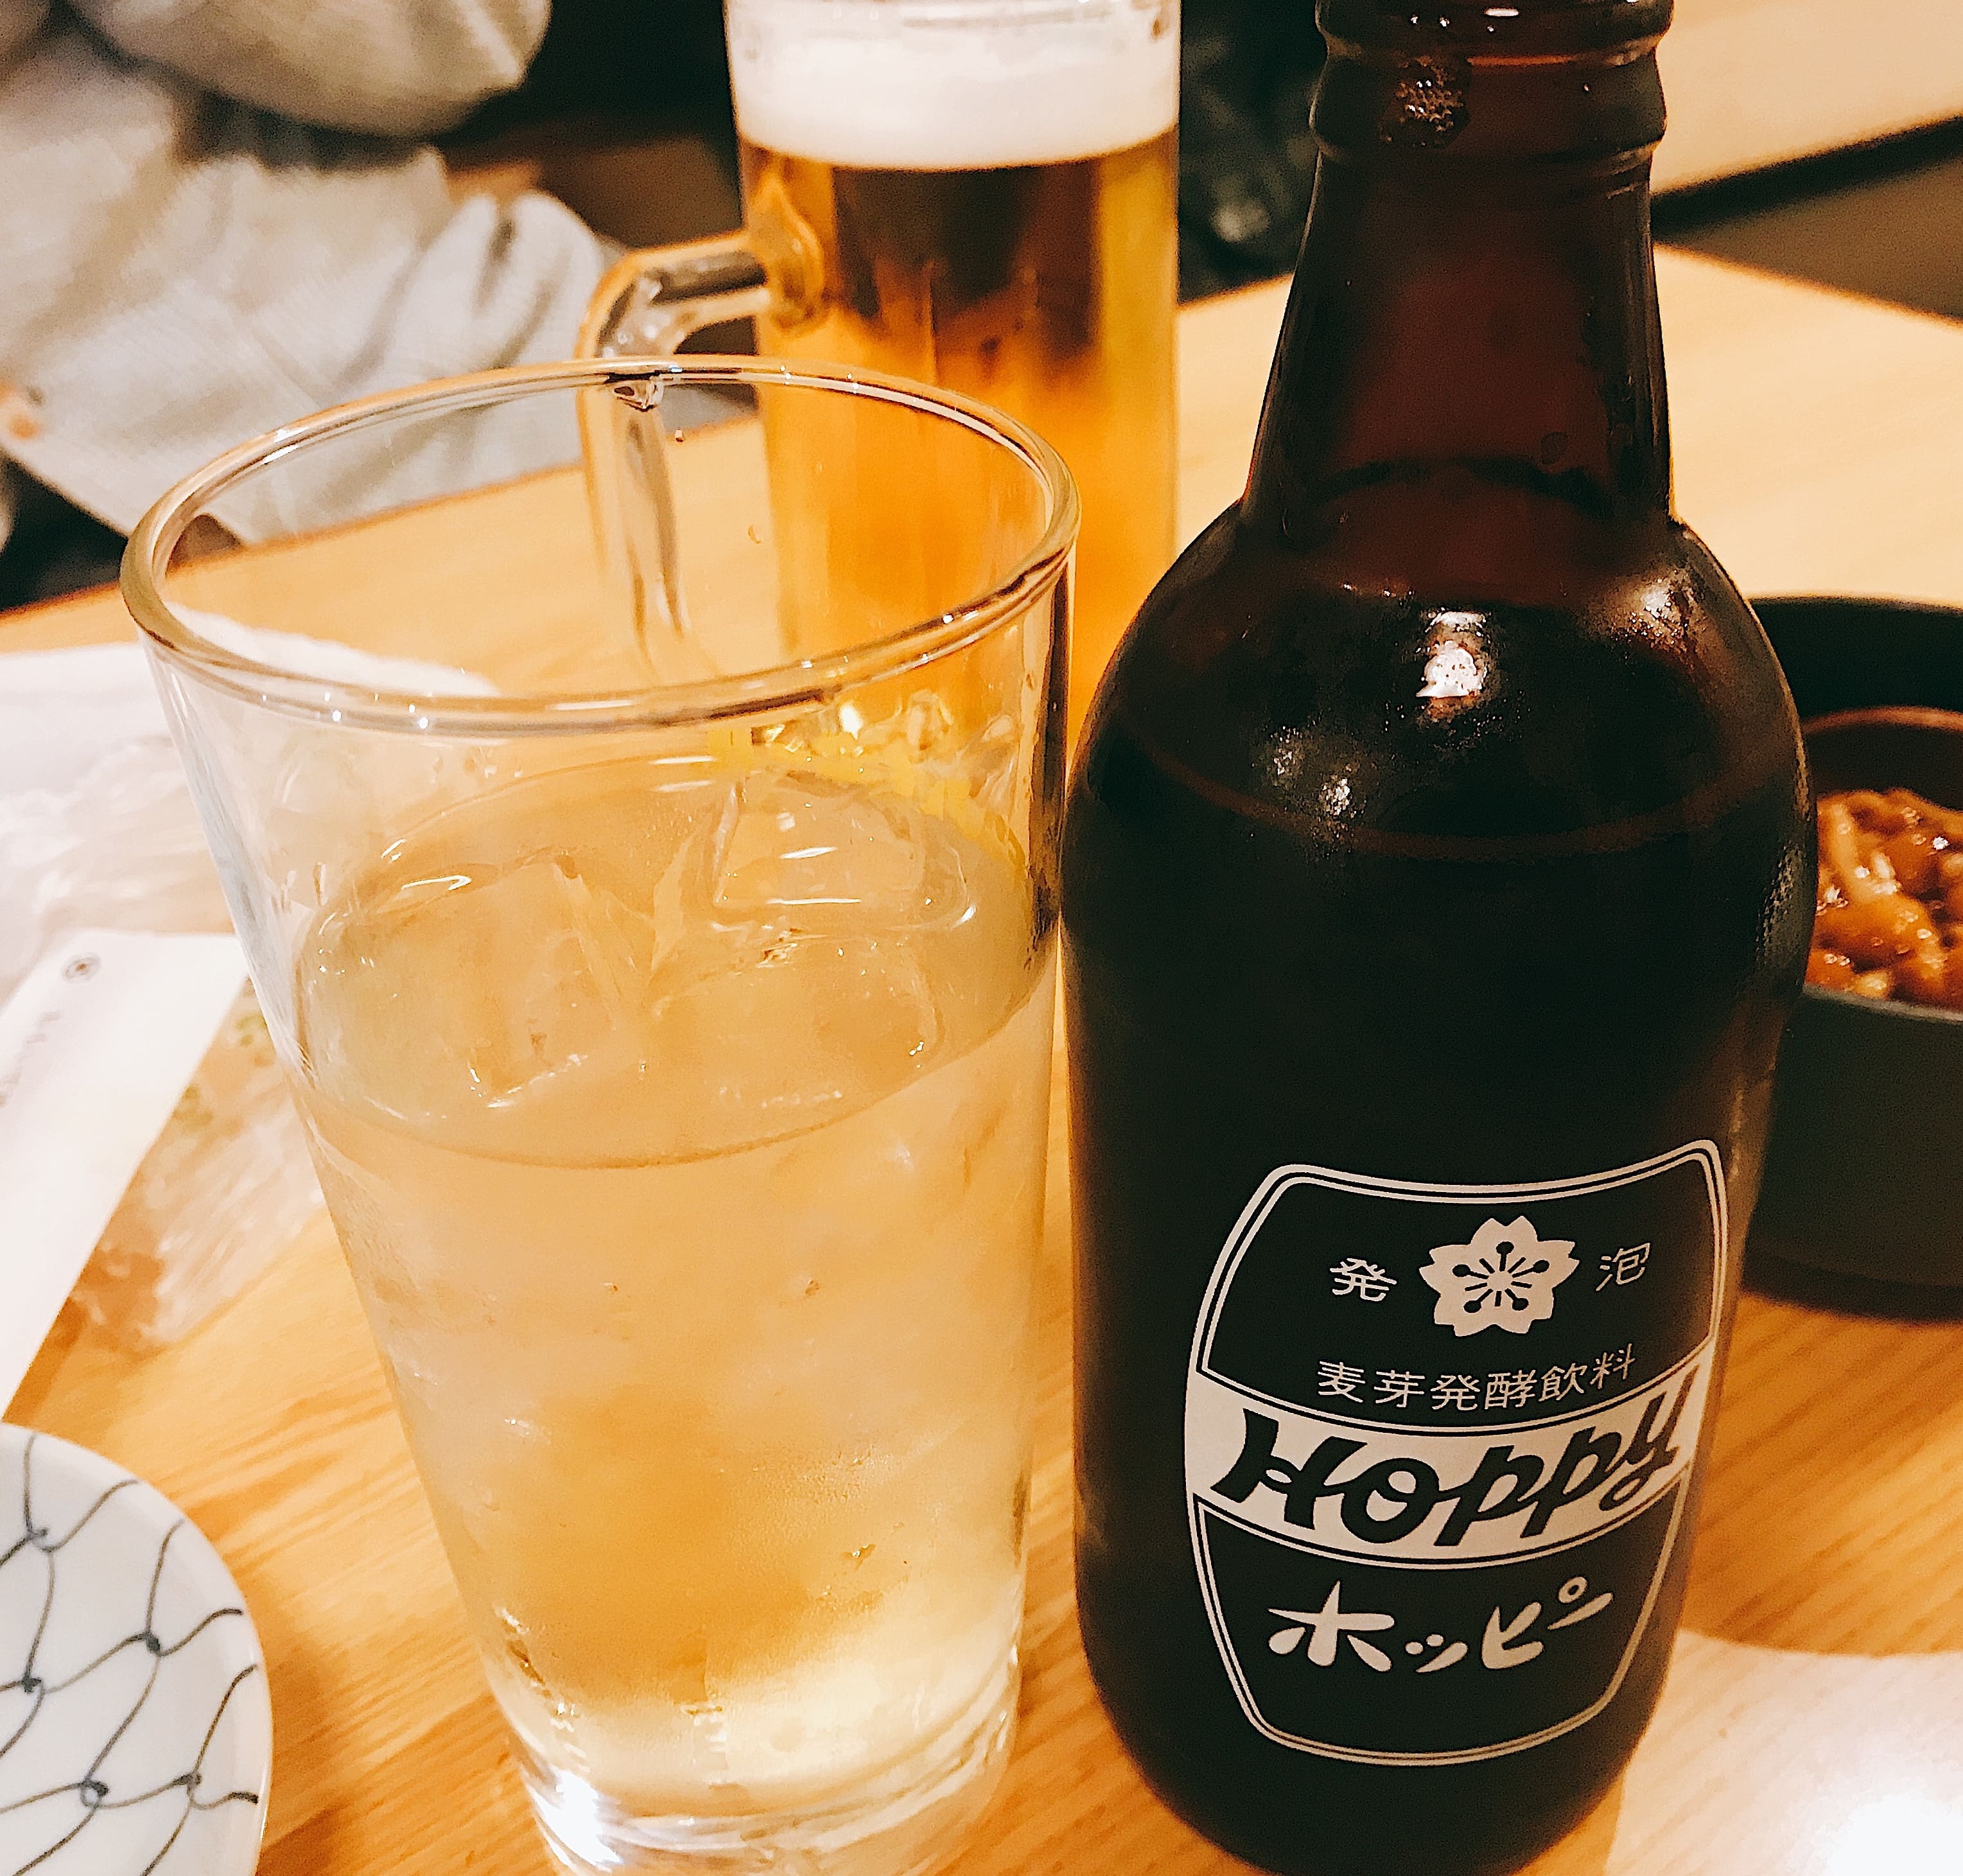 (A local drink of Tokyo, Hoppy. Drinking Hoppy combined with Shochu will leave you very refreshed.